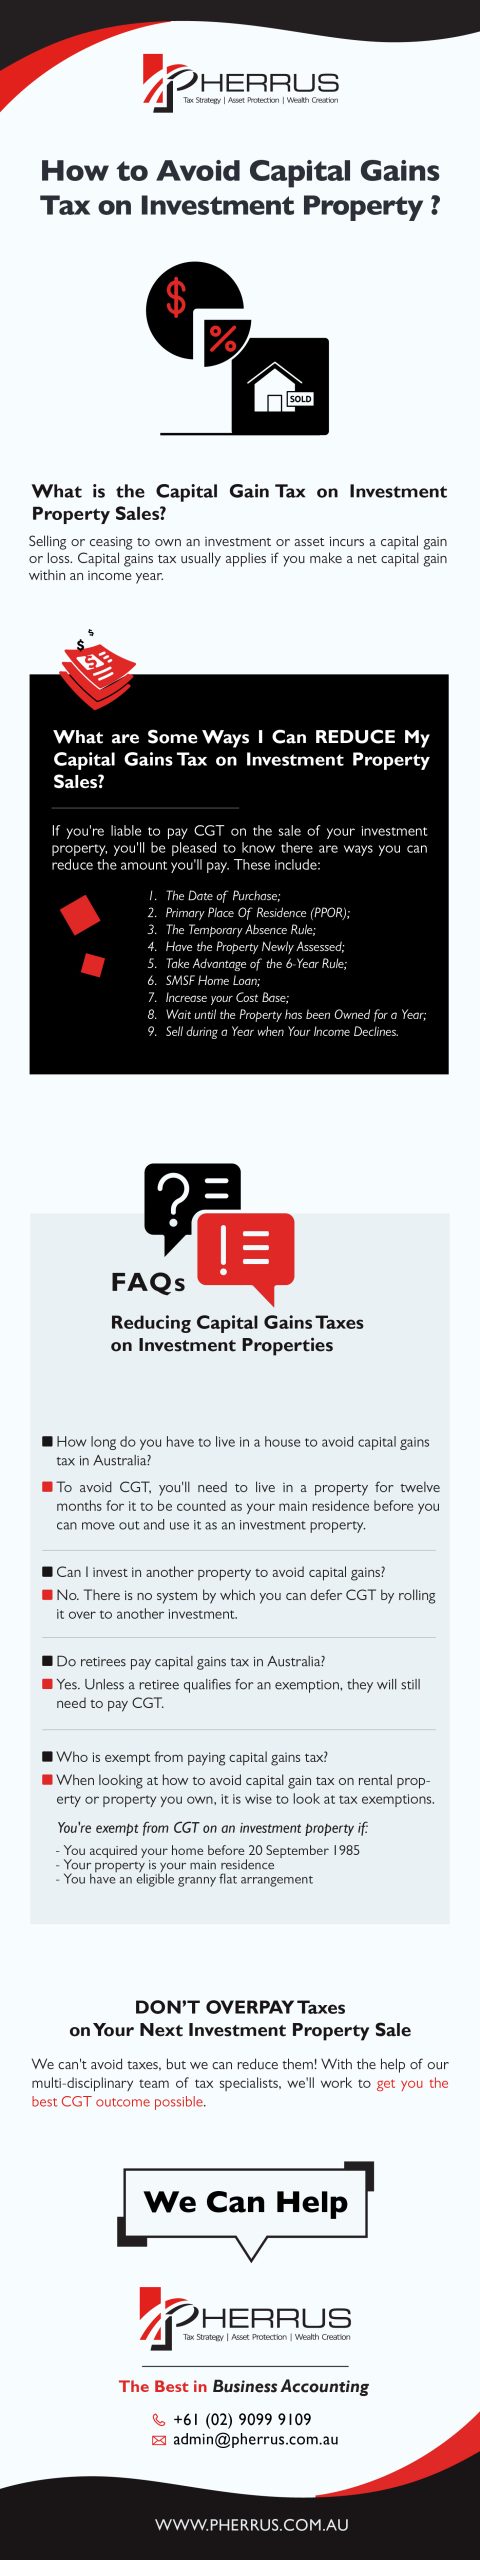 How to Avoid Capital Gains Tax on Investment Property Infographic